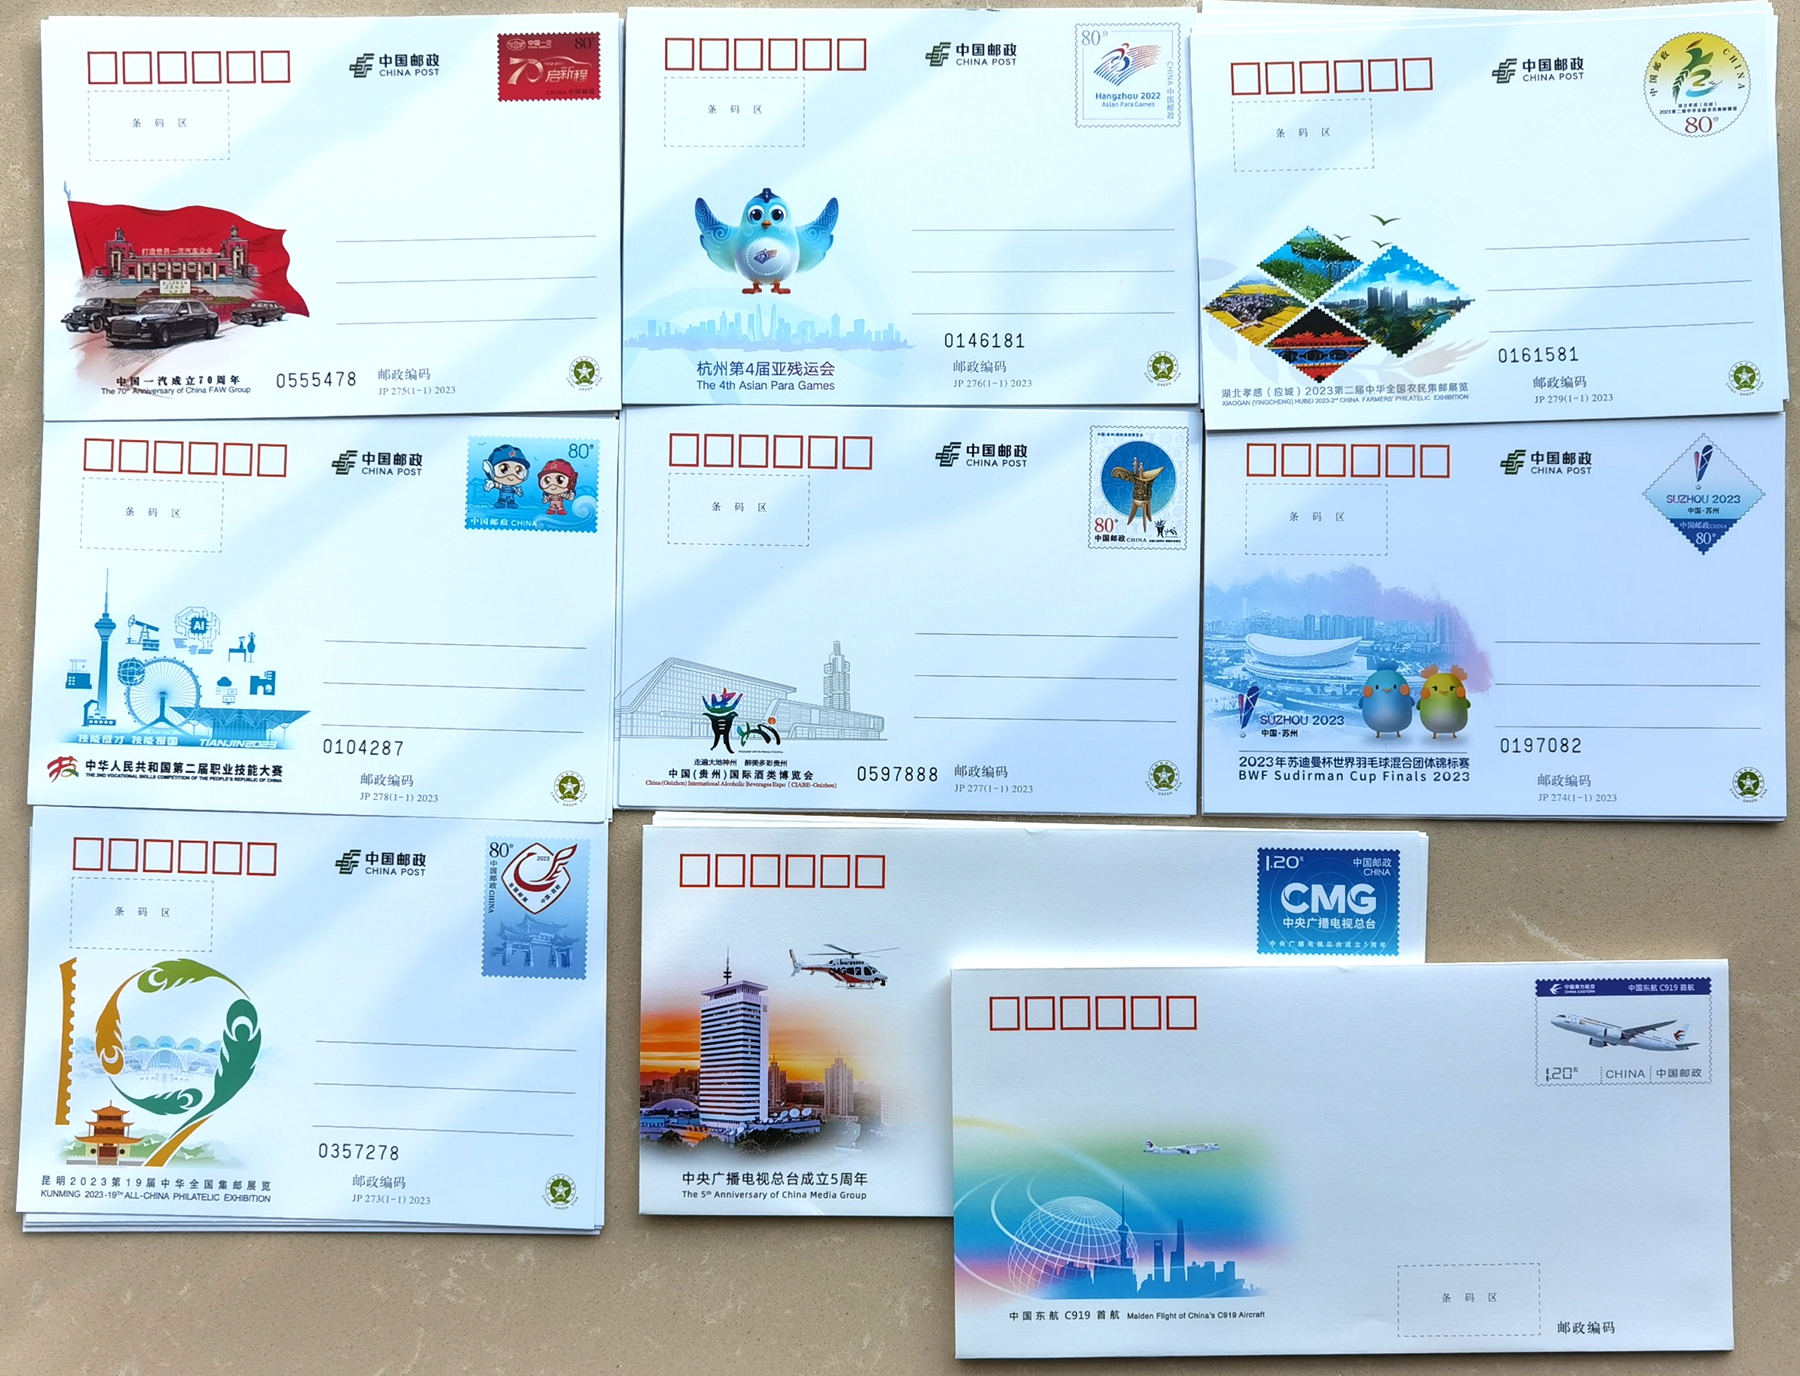 C2023, Complete China 2023 Postal Cards and Envelopes, 15 pcs